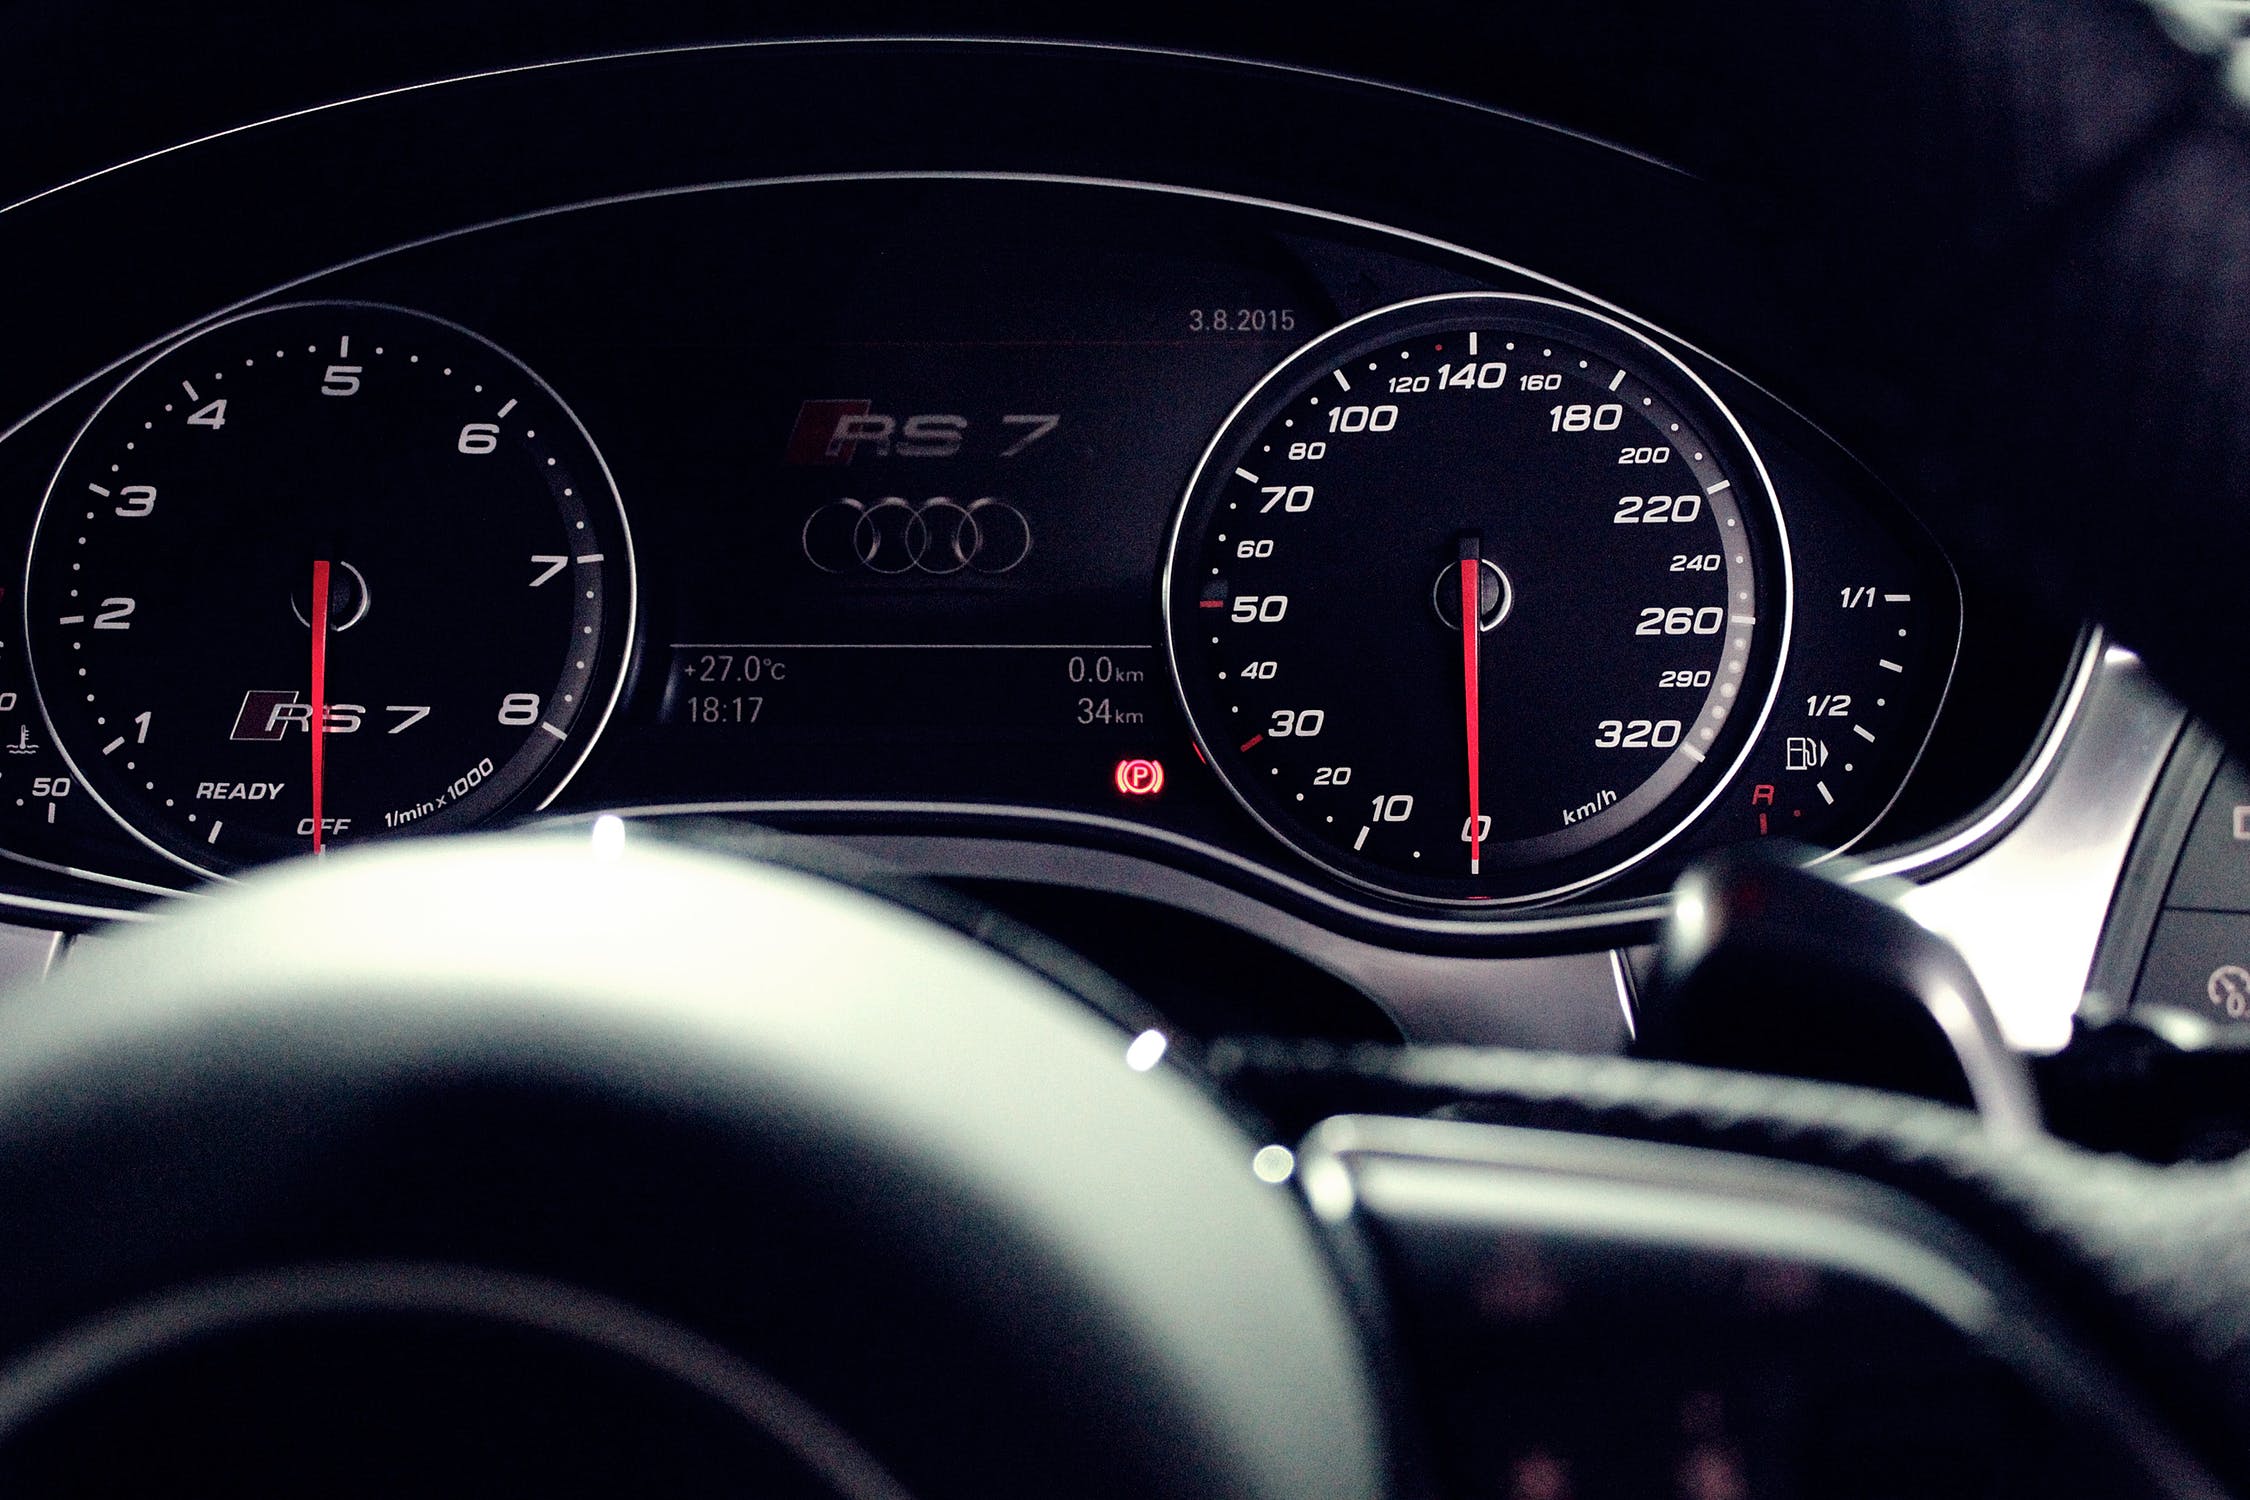 The clean dashboard of a fast car